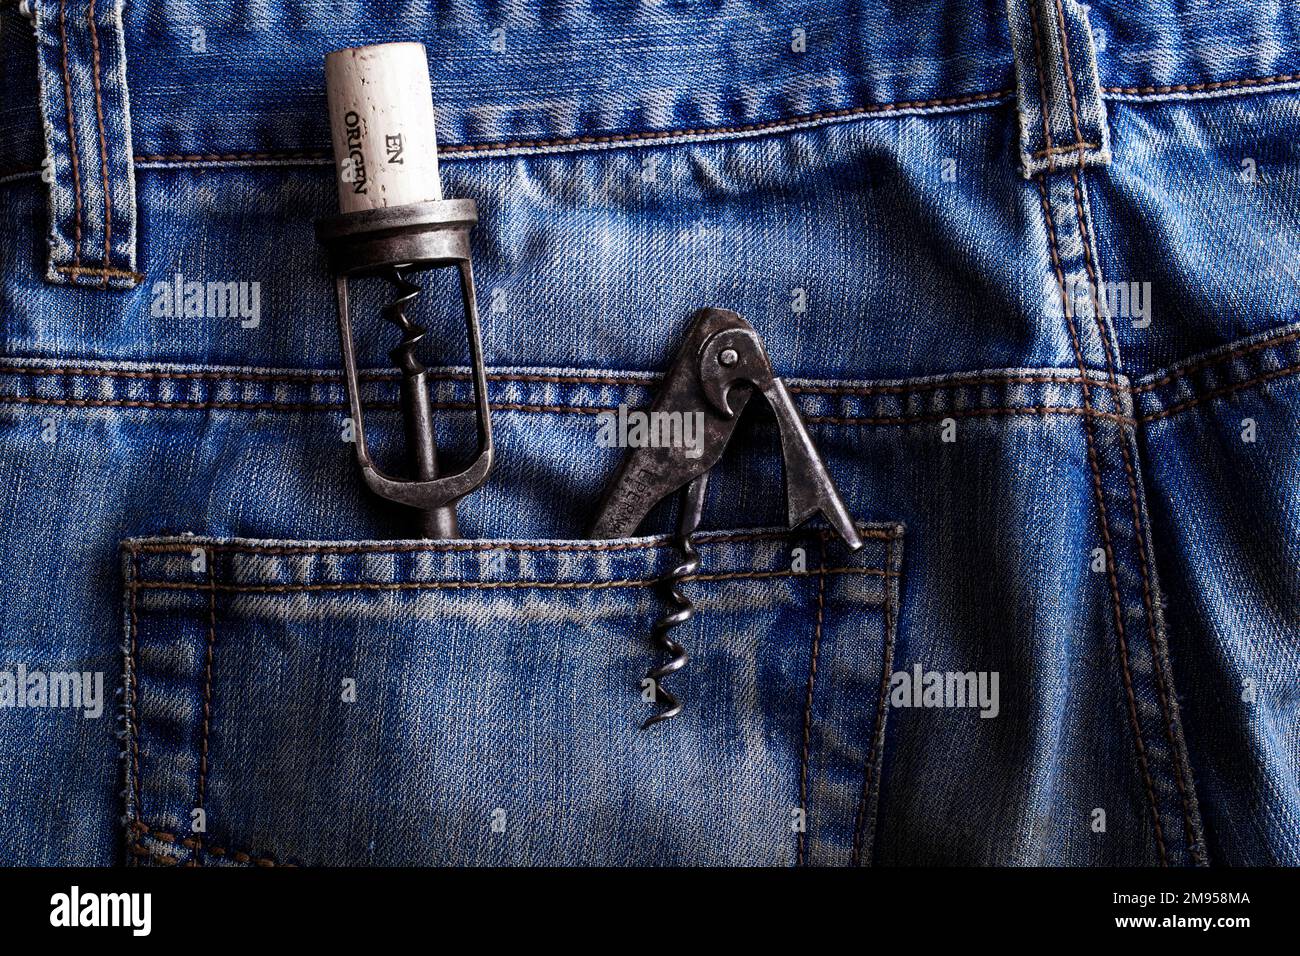 old corkscrew and bottle opener in the back pocket of an old pair of jeans Stock Photo